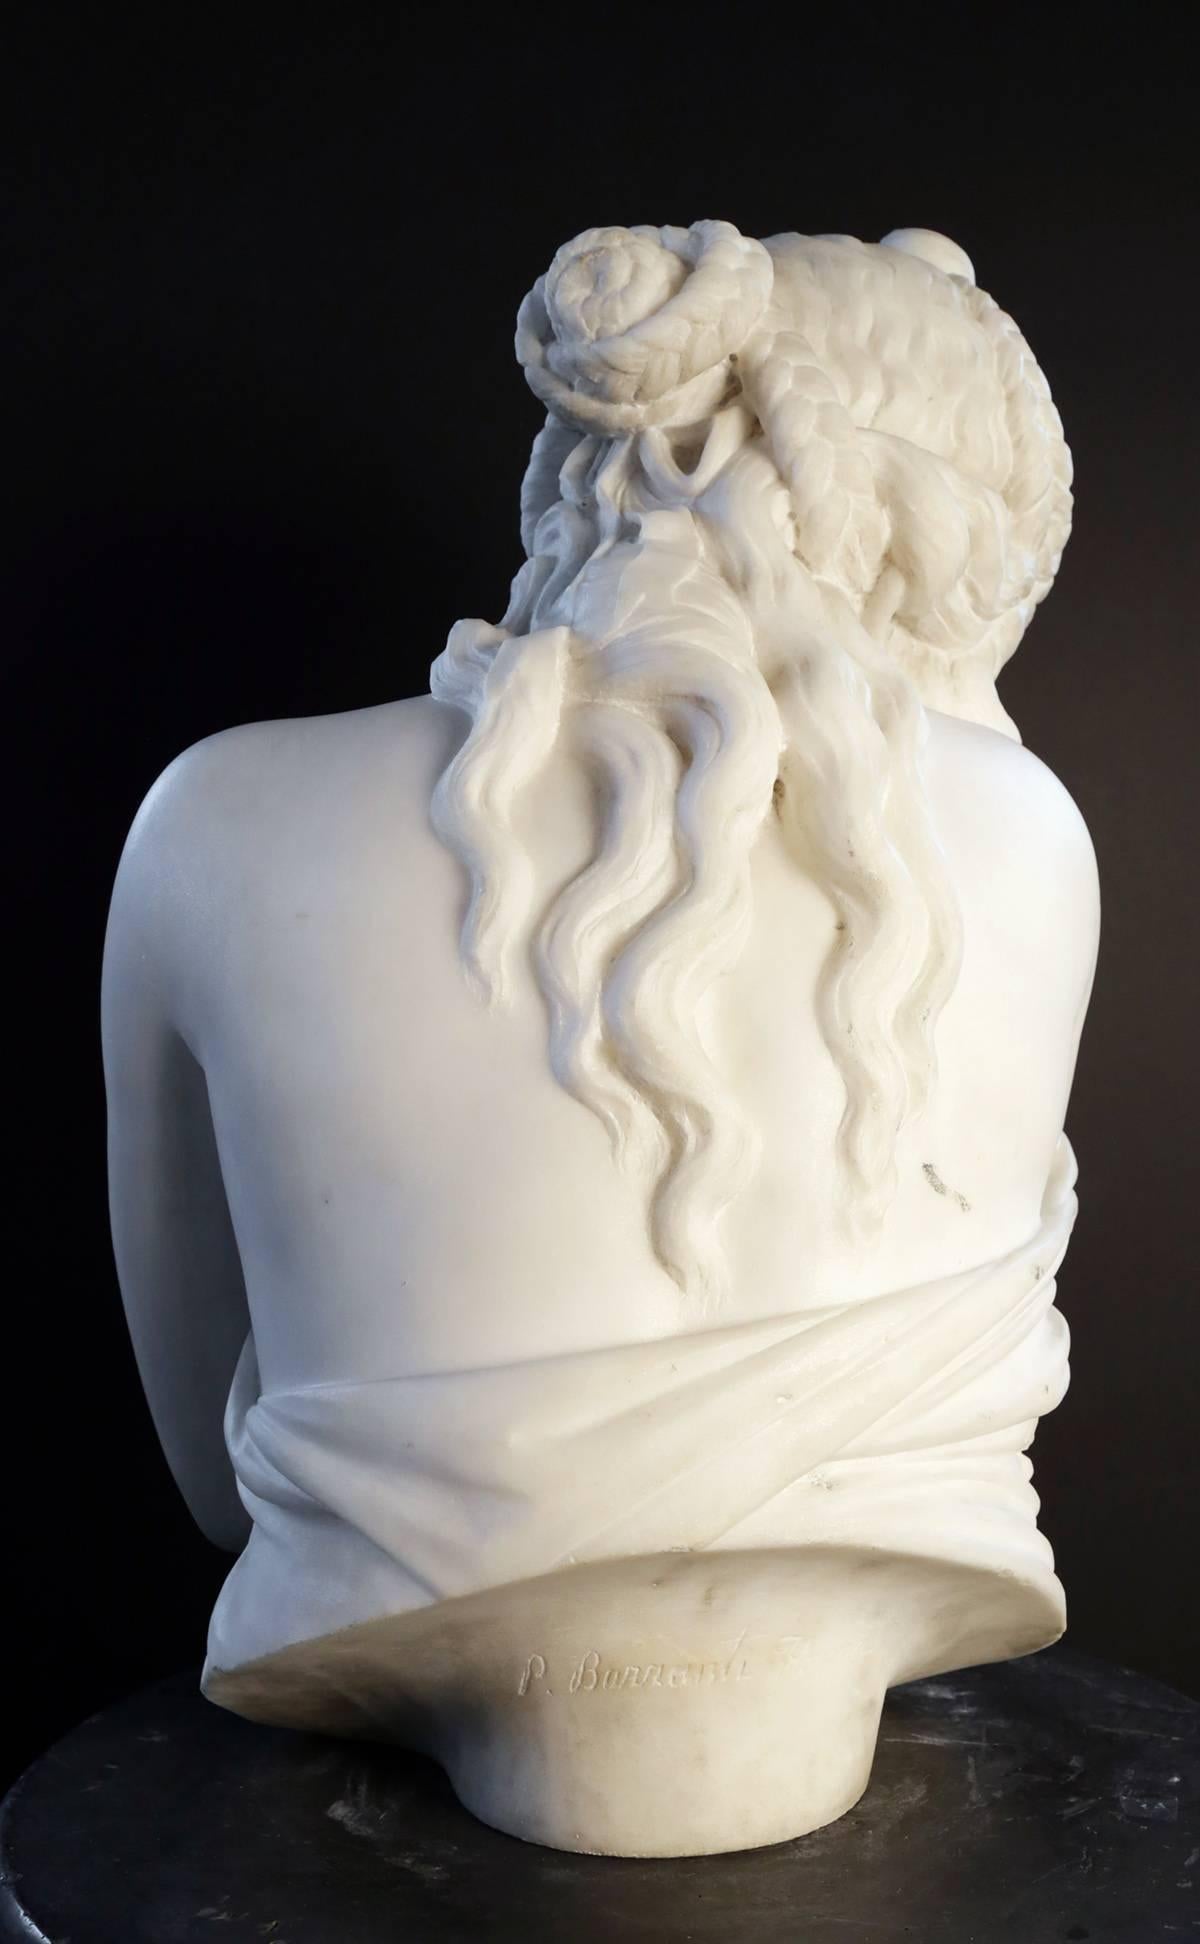 Pieter Barranti (Italian 19th century)
Carved Marble Bust of a Demure Young Girl

The 3/4 life size carved marble bust in the form of a young girl turning her head and covering herself with her gown. 
Signed P. Barranti, Florence
20 in. h. x 15